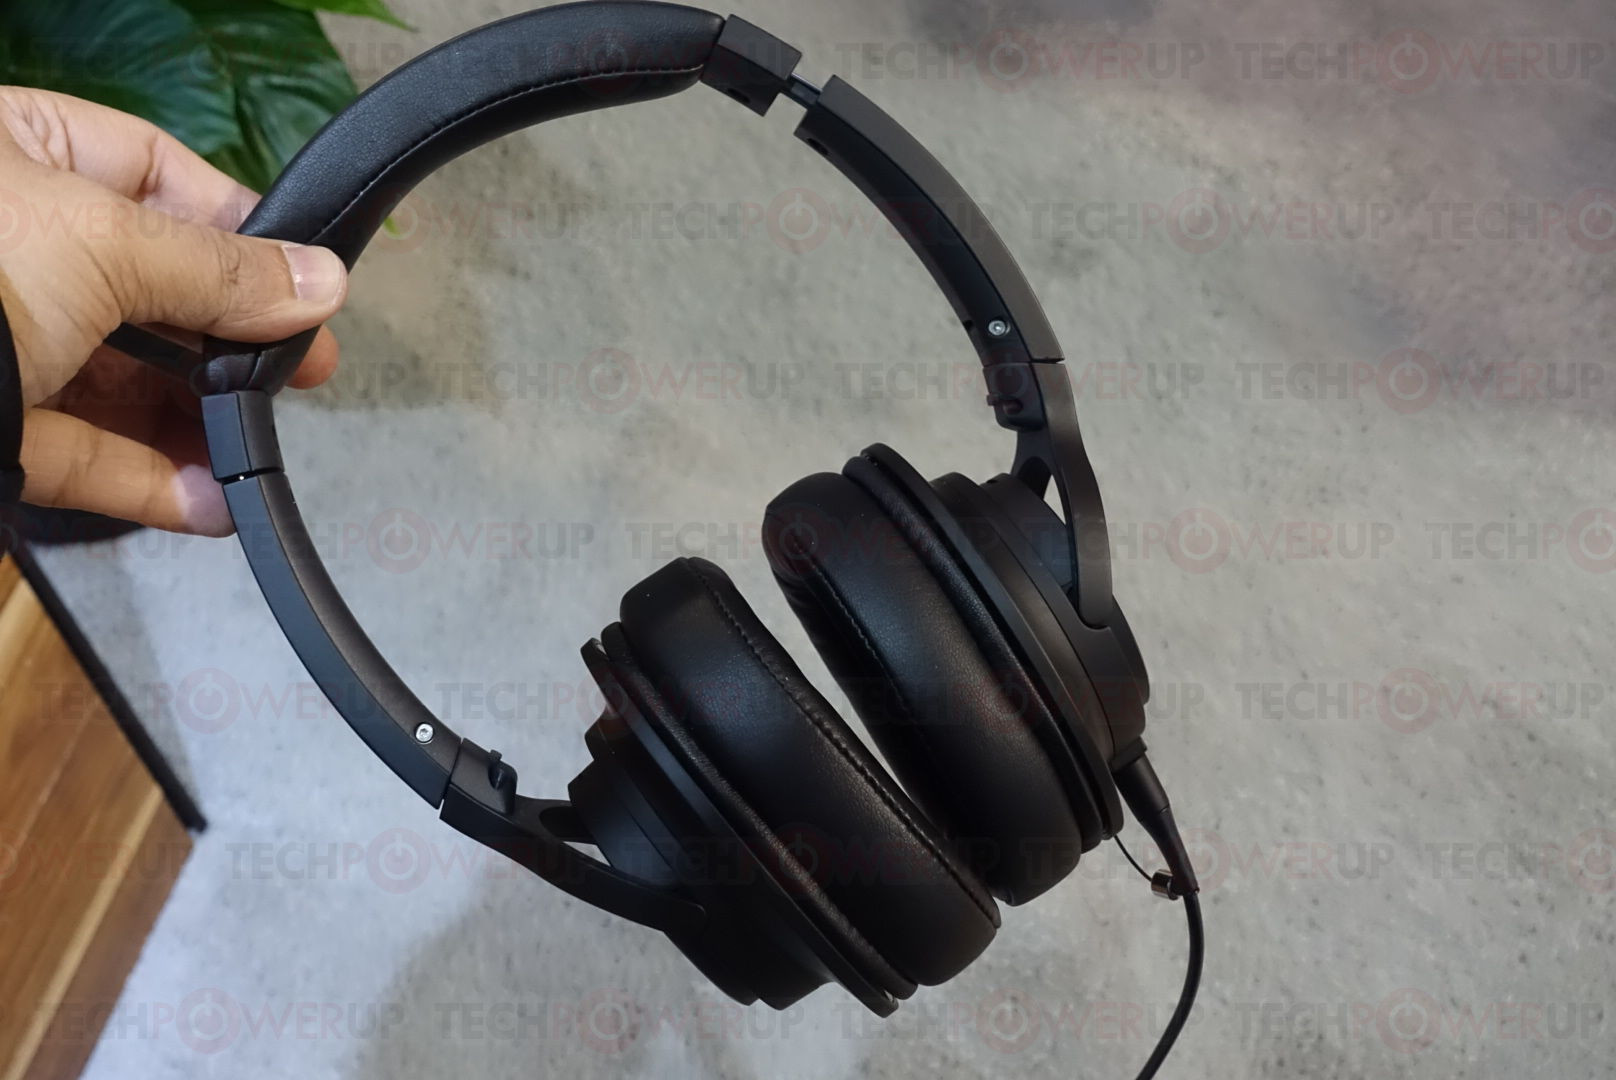 Audio-Technica Debuts New Wireless High-end Personal Audio at CES 2019 |  TechPowerUp